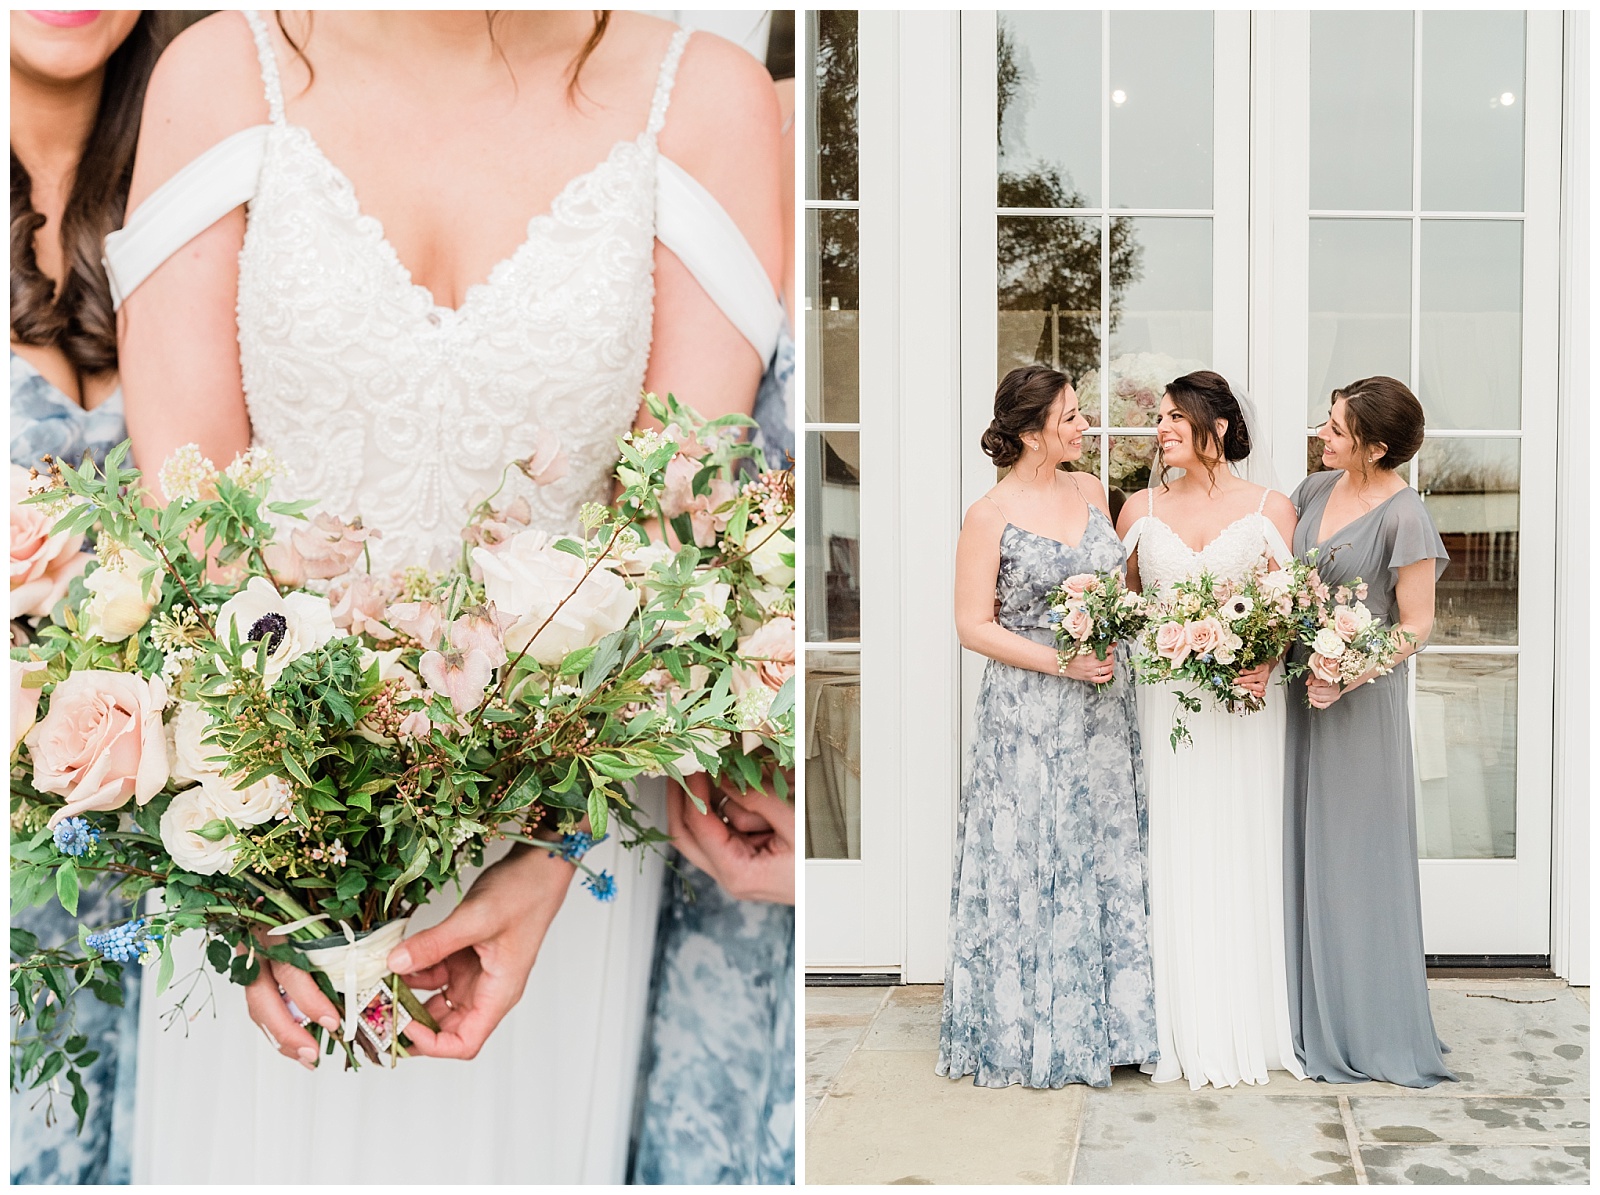 Bride and bridesmaids hold their bouquets looking at each other.